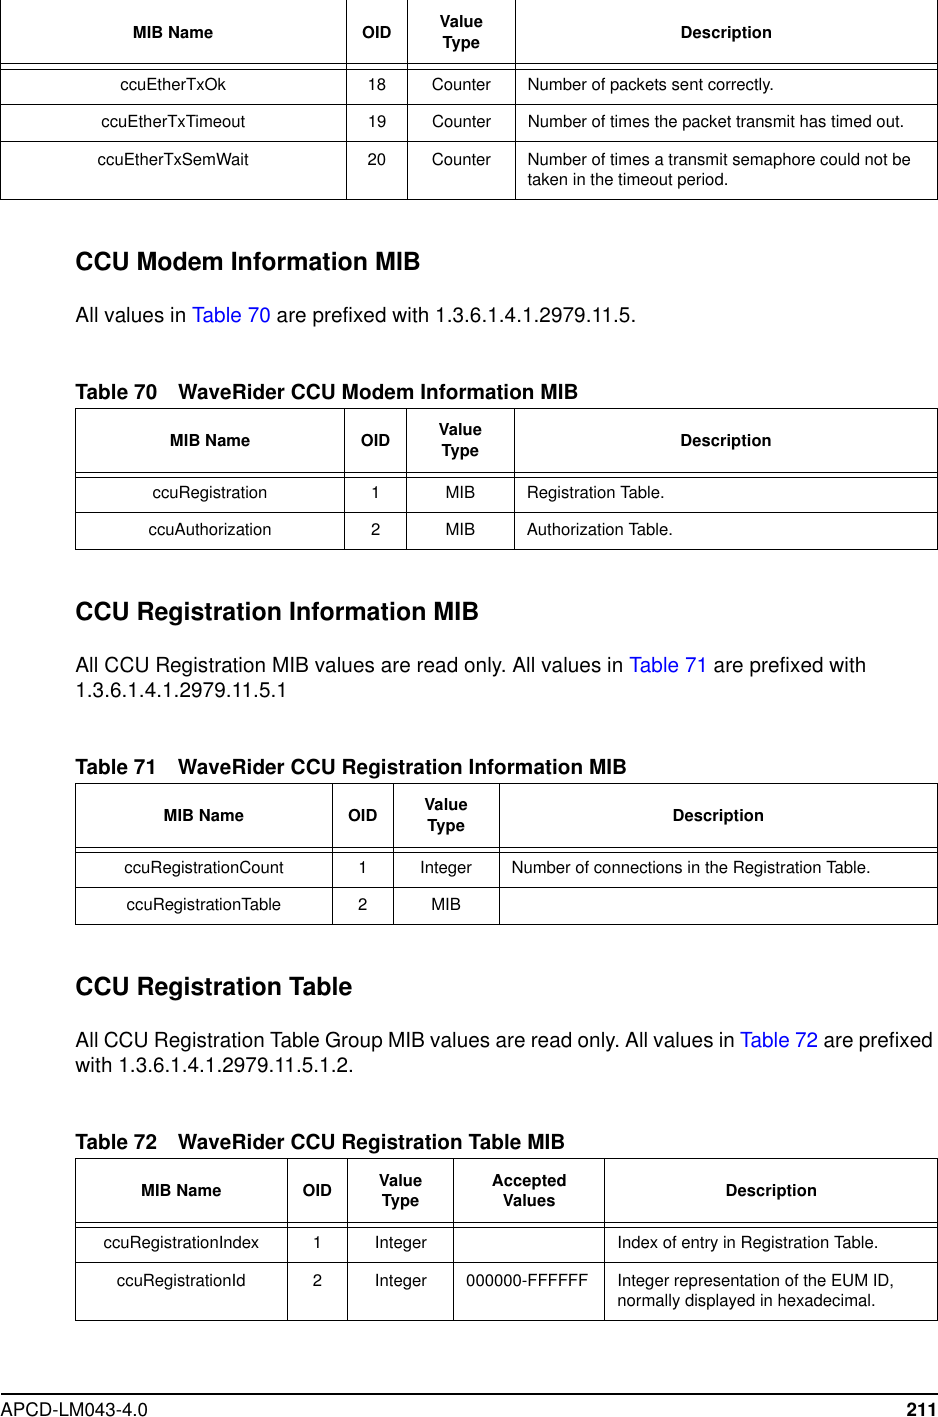 APCD-LM043-4.0 211CCU Modem Information MIBAll values in Table 70 are prefixed with 1.3.6.1.4.1.2979.11.5.Table 70 WaveRider CCU Modem Information MIBCCU Registration Information MIBAll CCU Registration MIB values are read only. All values in Table 71 are prefixed with1.3.6.1.4.1.2979.11.5.1Table 71 WaveRider CCU Registration Information MIBCCU Registration TableAll CCU Registration Table Group MIB values are read only. All values in Table 72 are prefixedwith 1.3.6.1.4.1.2979.11.5.1.2.Table 72 WaveRider CCU Registration Table MIBccuEtherTxOk 18 Counter Number of packets sent correctly.ccuEtherTxTimeout 19 Counter Number of times the packet transmit has timed out.ccuEtherTxSemWait 20 Counter Number of times a transmit semaphore could not betaken in the timeout period.MIB Name OID ValueType DescriptionMIB Name OID ValueType DescriptionccuRegistration 1 MIB Registration Table.ccuAuthorization 2MIB Authorization Table.MIB Name OID ValueType DescriptionccuRegistrationCount 1 Integer Number of connections in the Registration Table.ccuRegistrationTable 2MIBMIB Name OID ValueType AcceptedValues DescriptionccuRegistrationIndex 1 Integer Index of entry in Registration Table.ccuRegistrationId 2Integer 000000-FFFFFF Integer representation of the EUM ID,normally displayed in hexadecimal.